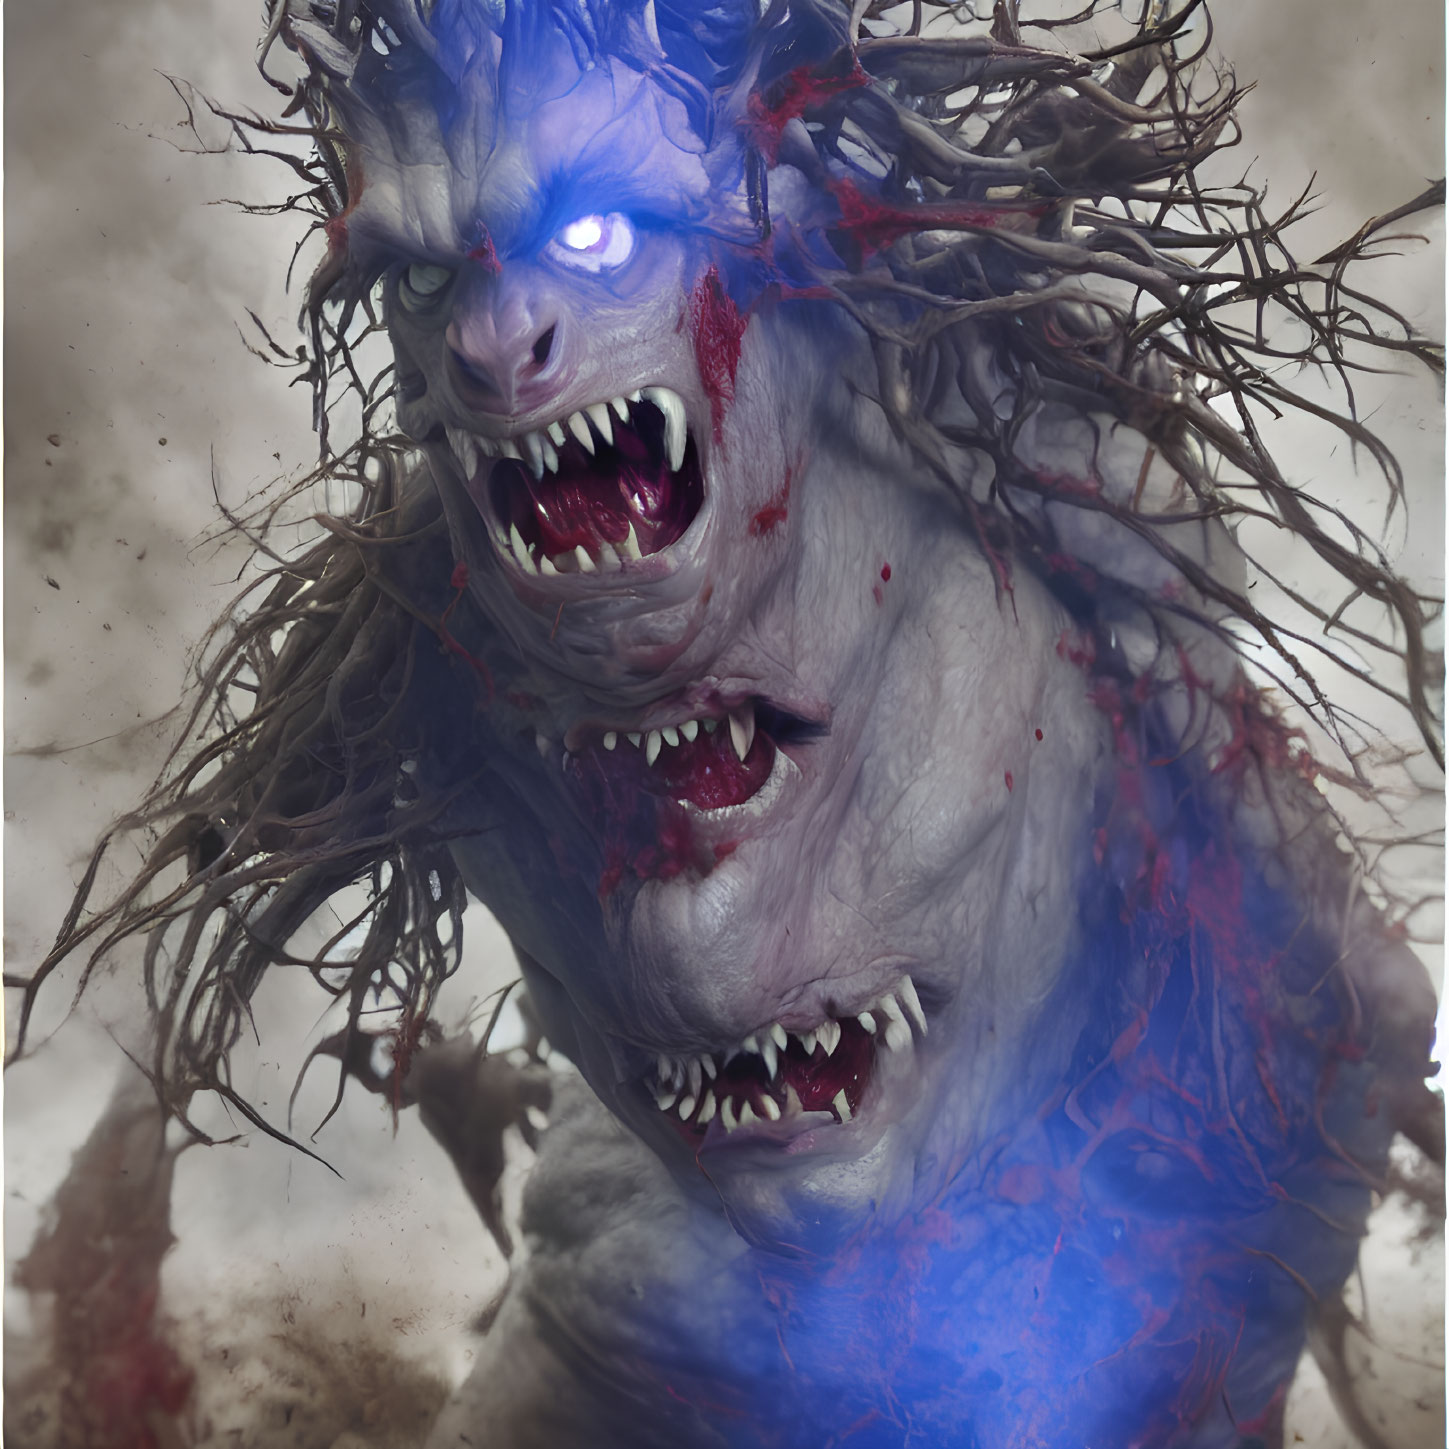 Blue-skinned fantasy creature with sharp fangs and wild hair roaring aggressively in a stormy scene